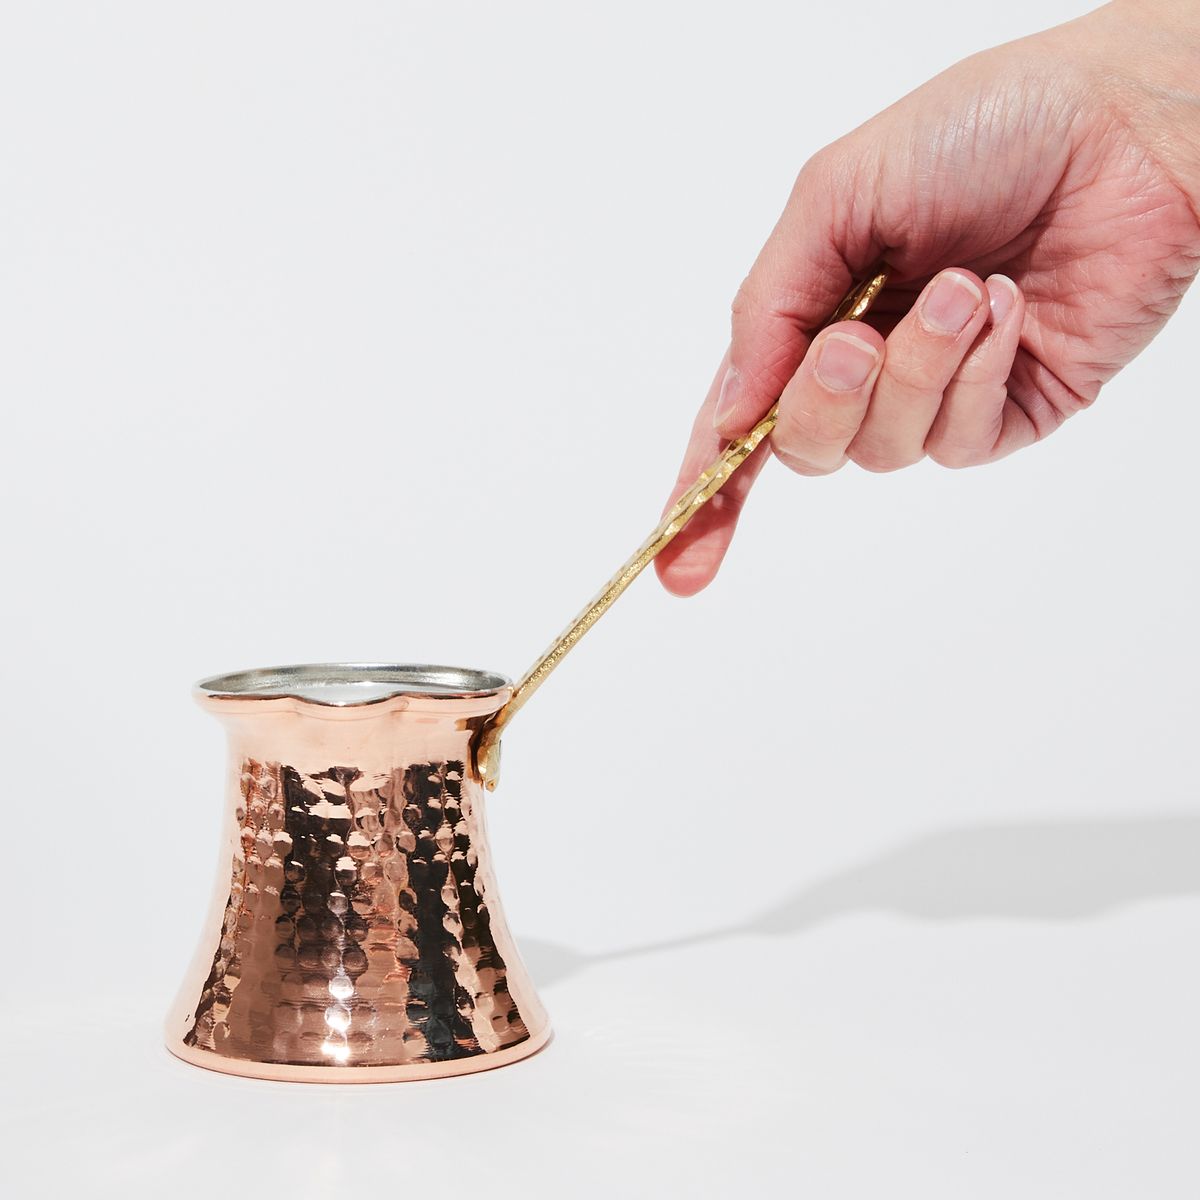 A hand holding a round copper pot by a long angled handle